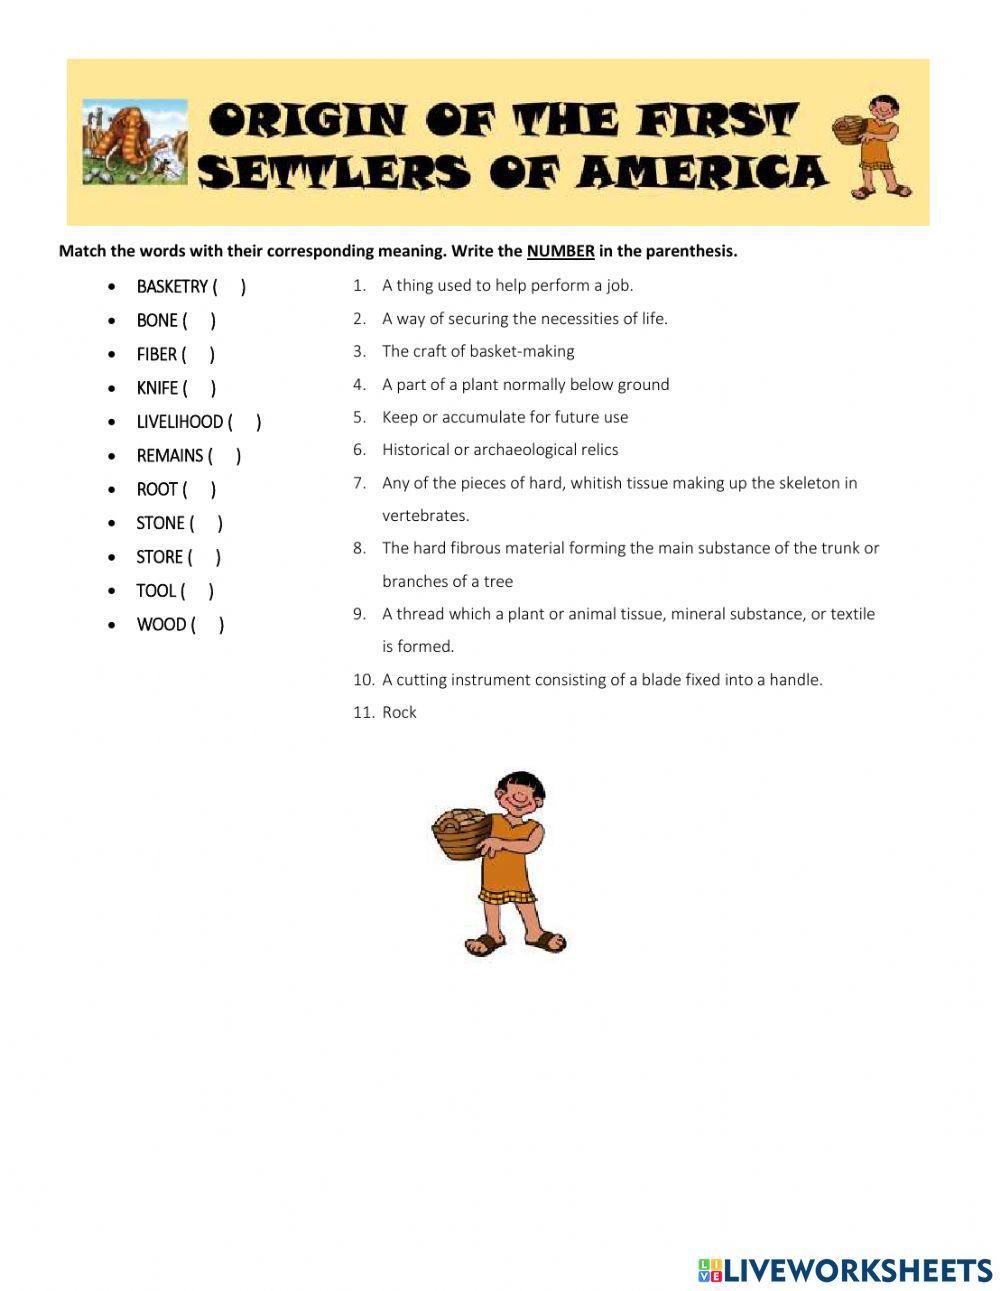 Origin of the first settlers of America vocabulary